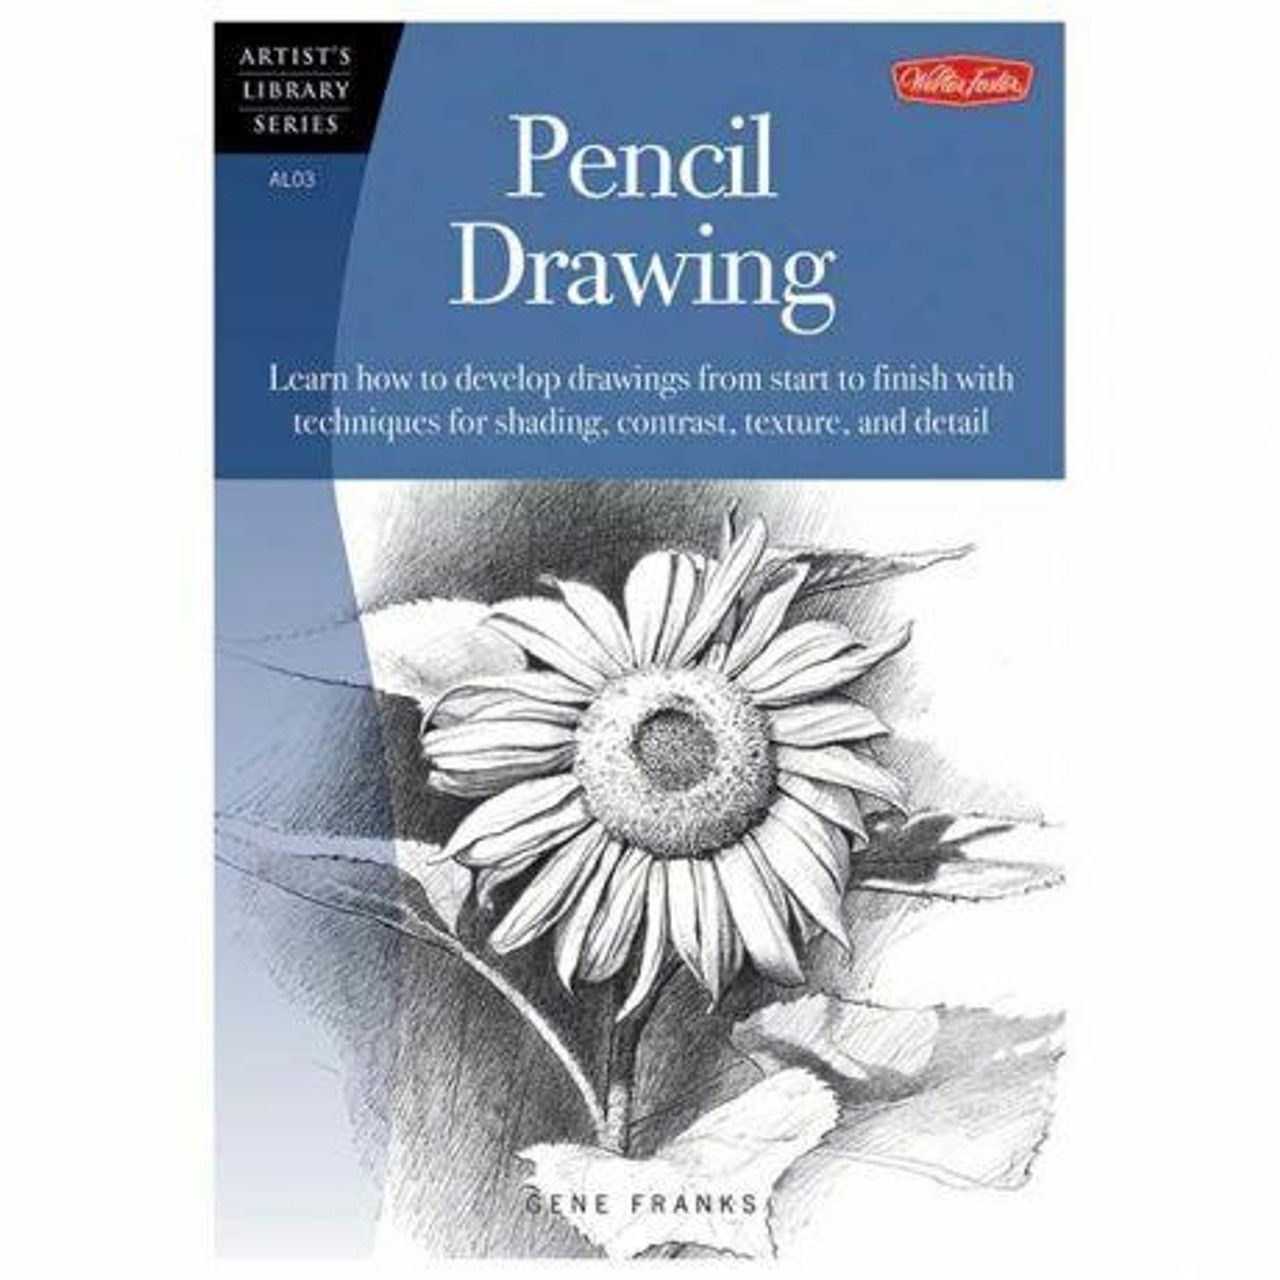 The Art of Spiral Drawing - Walter Foster